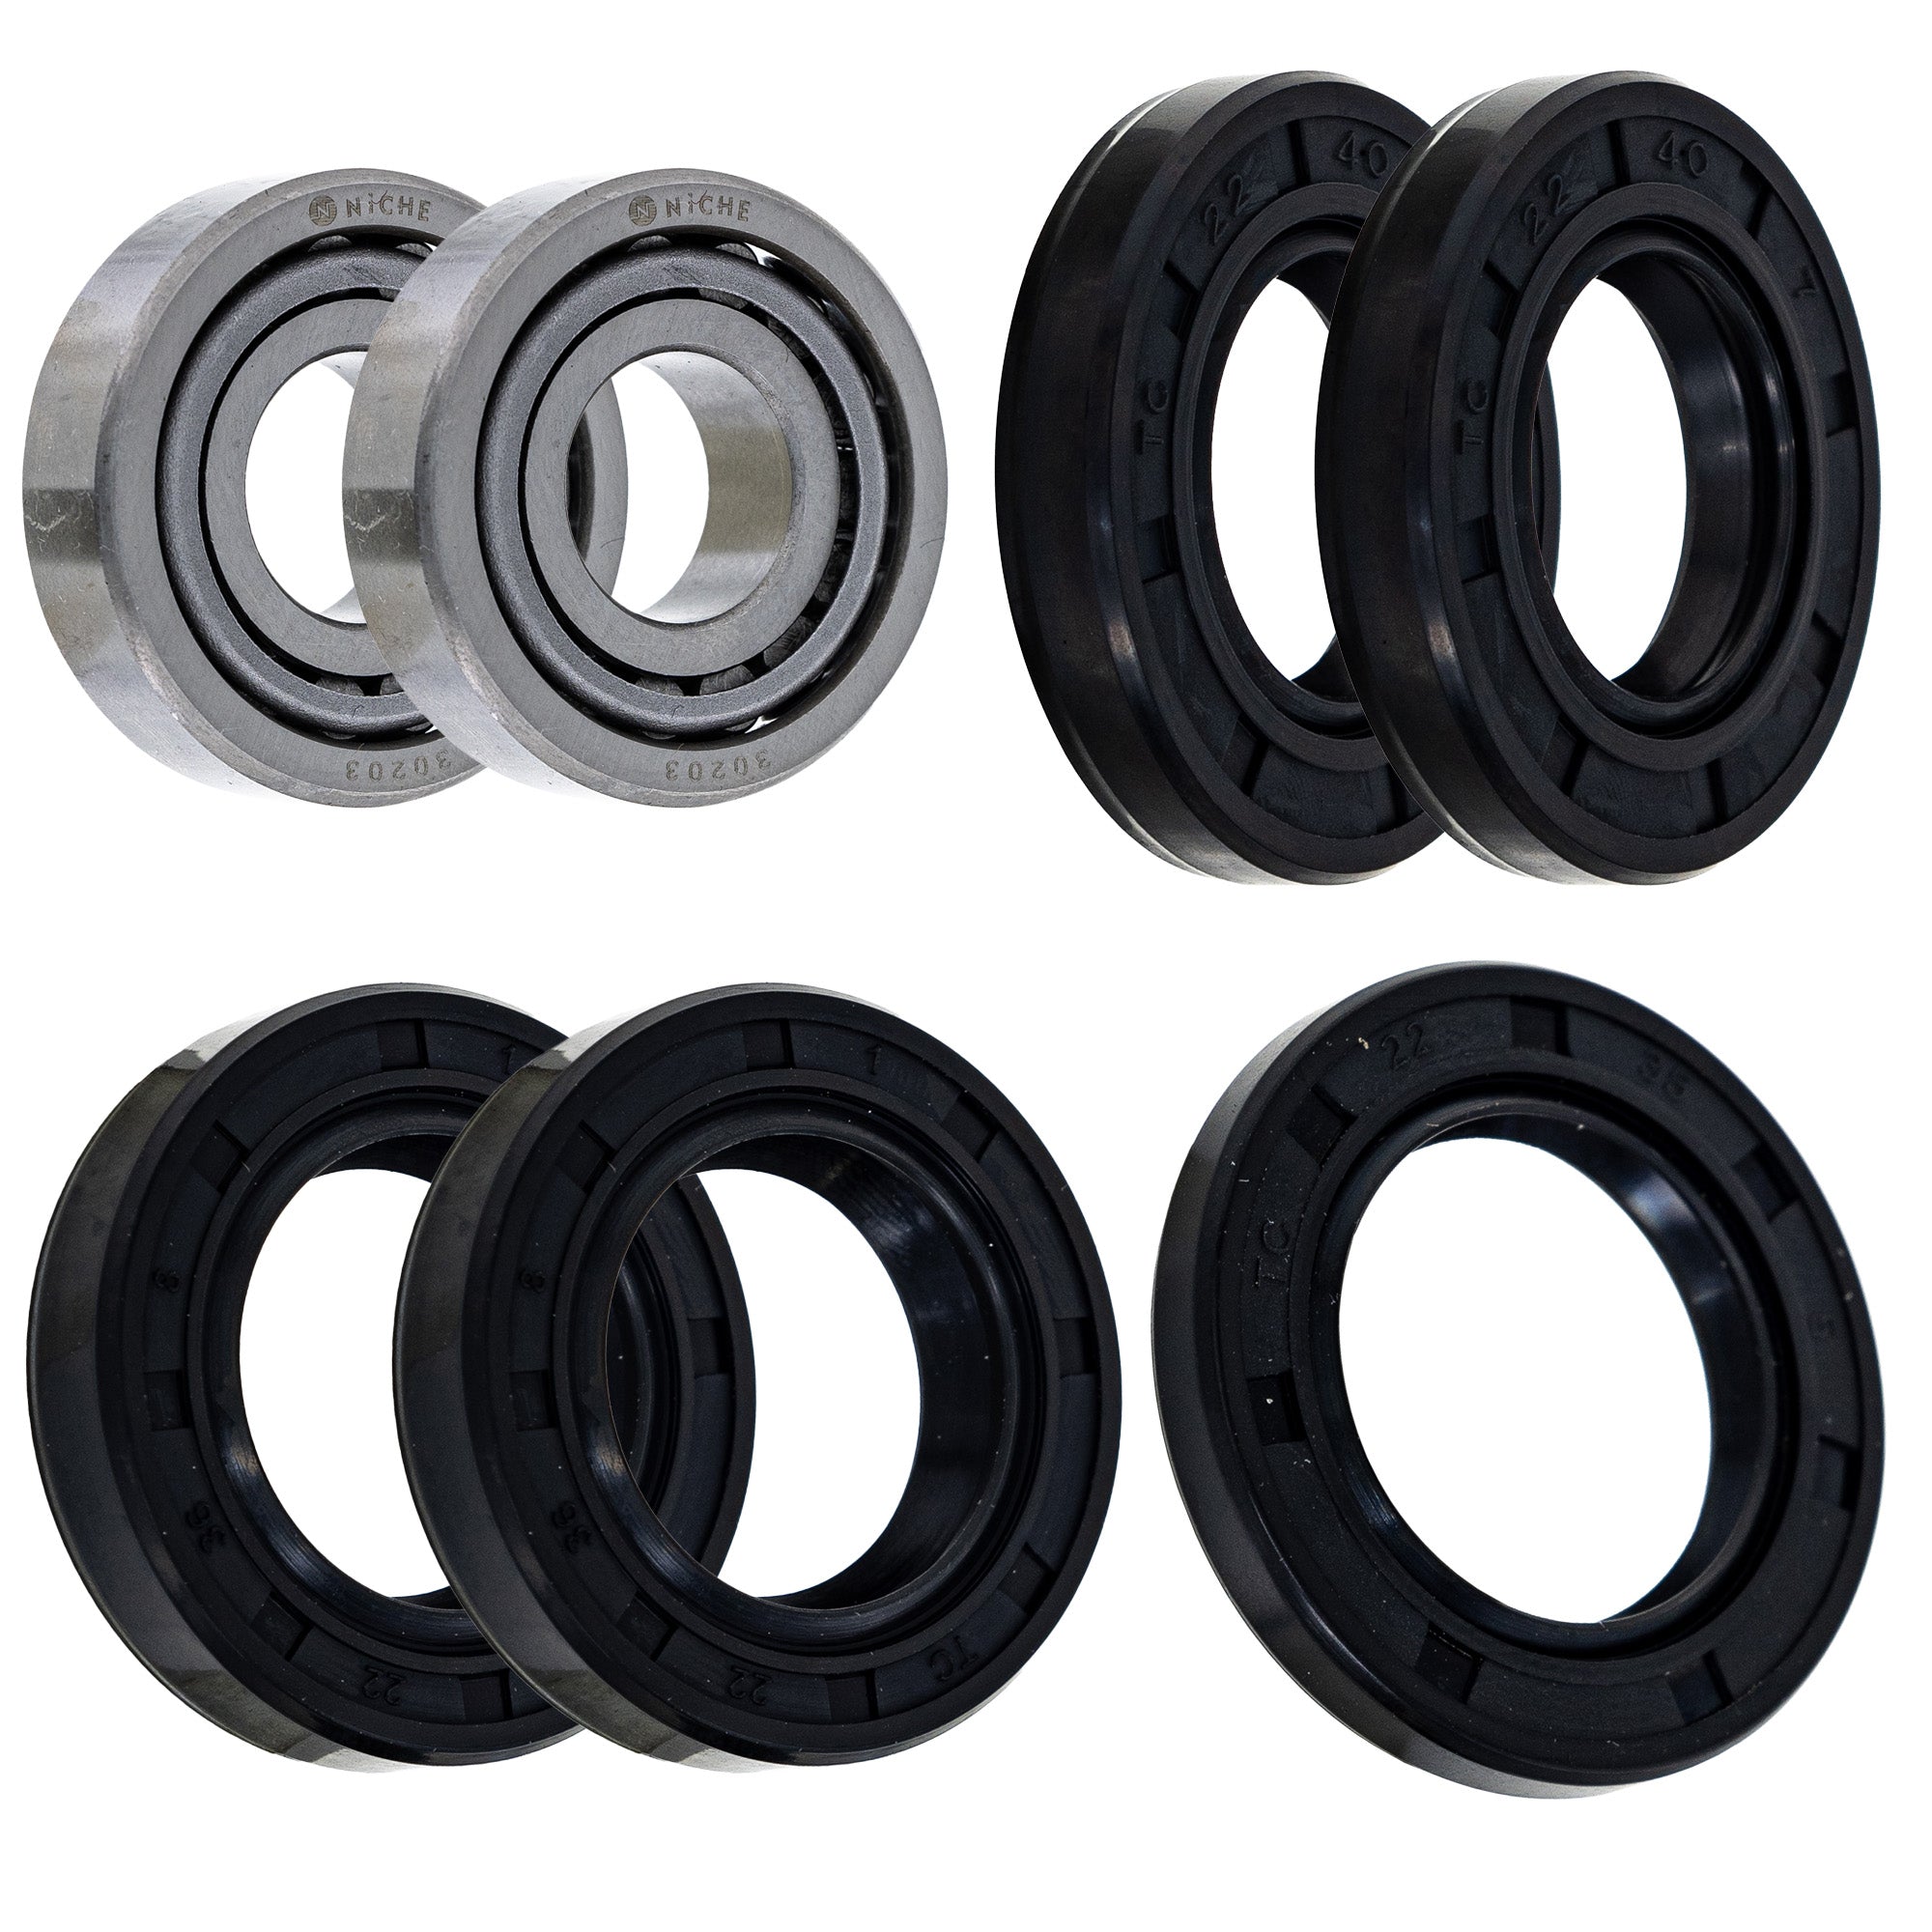 Wheel Bearing Seal Kit for zOTHER R90S R80ST R80RT R80GS NICHE MK1008851